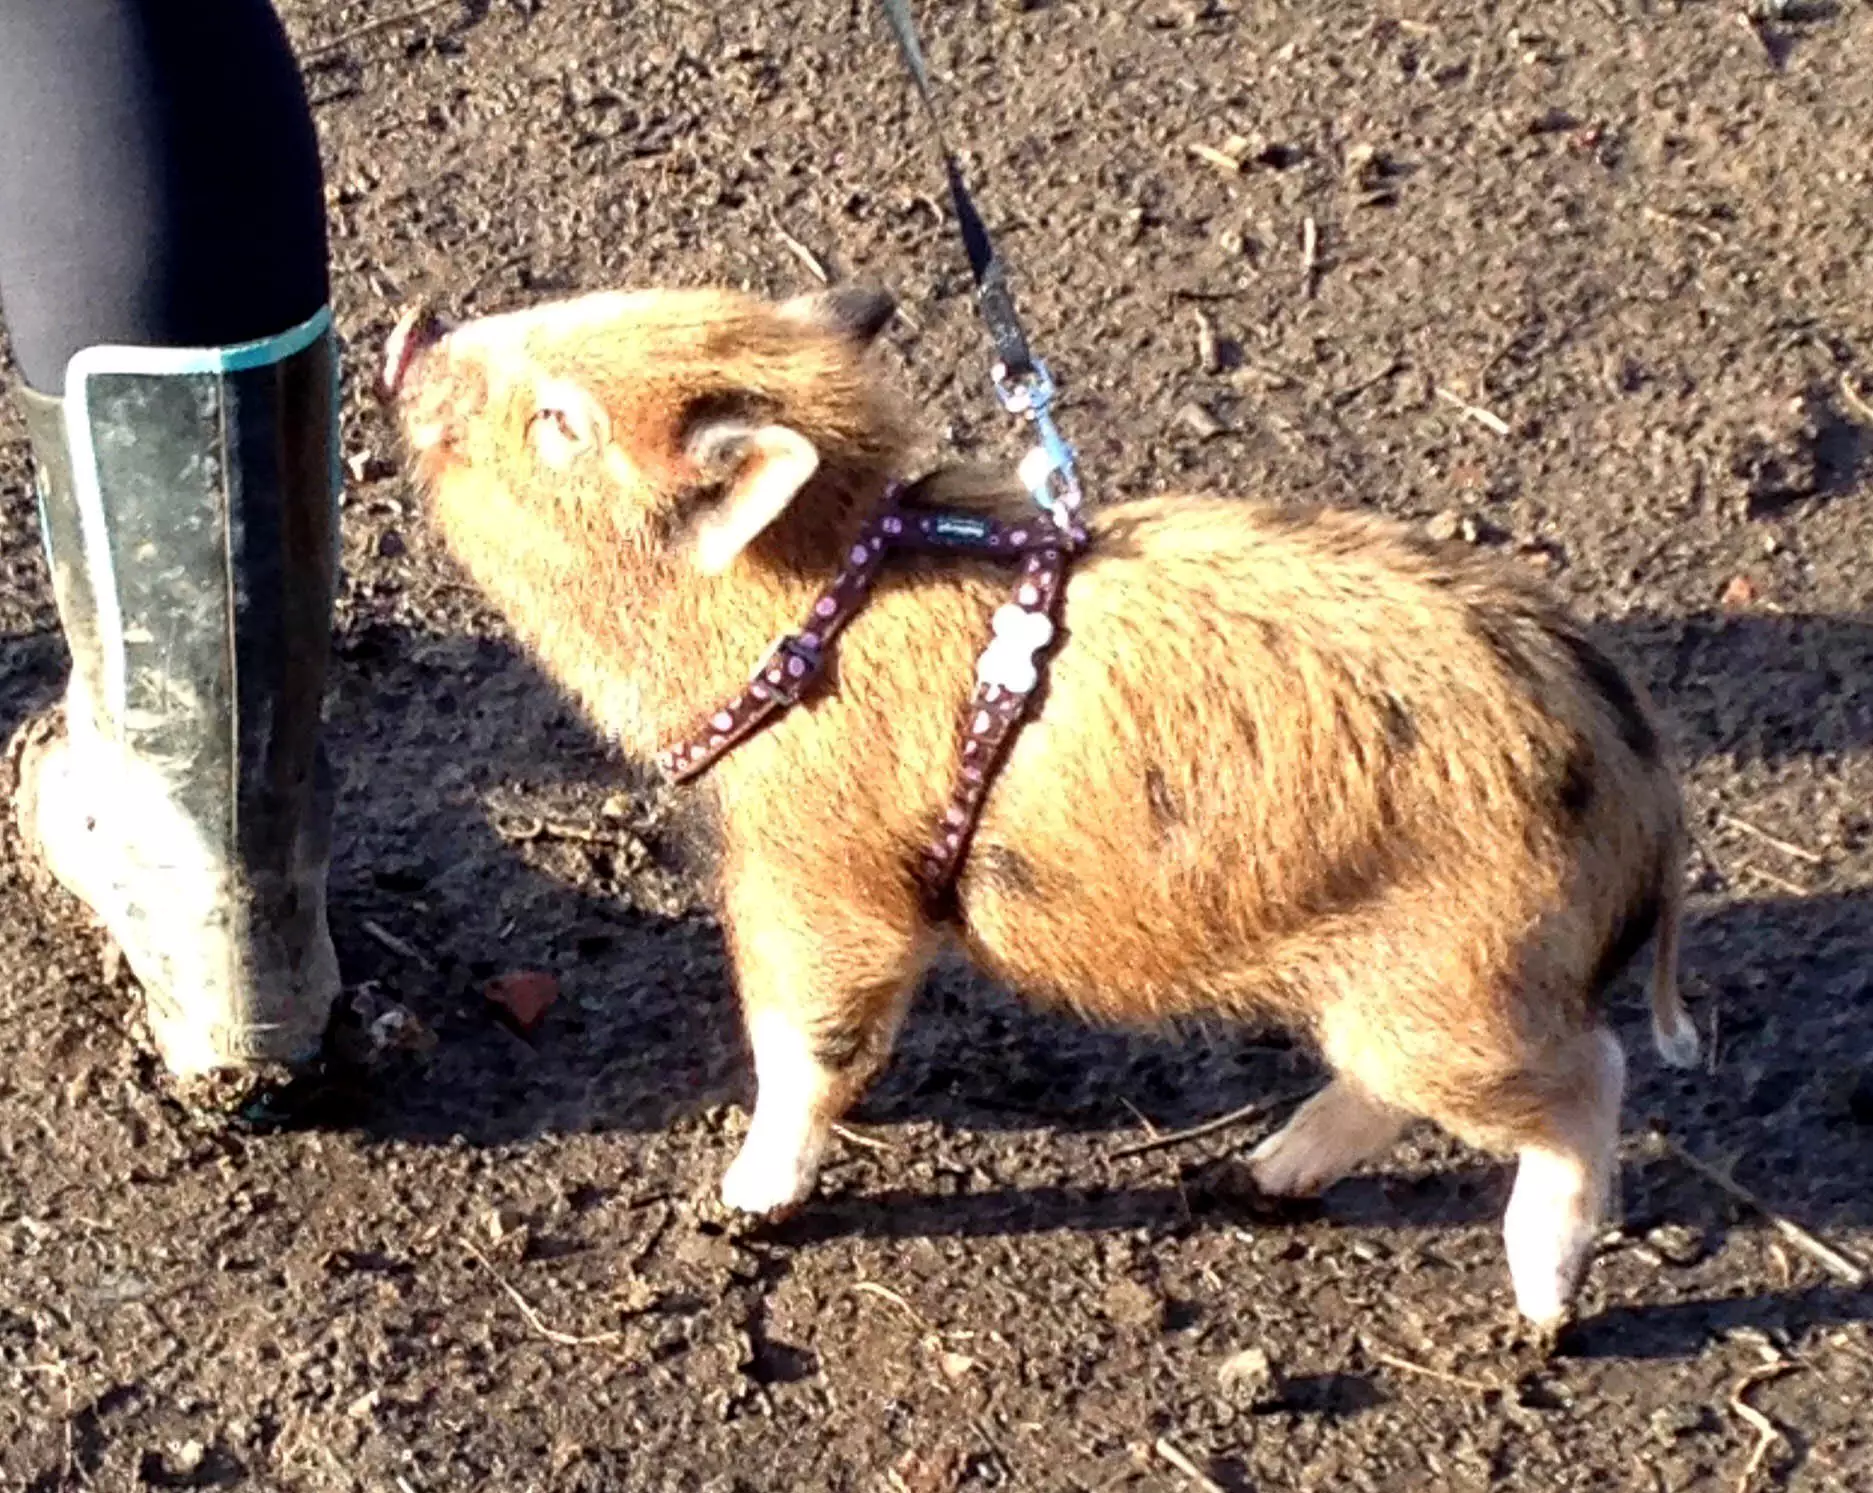 Grace the pig started off tiny but she's grown massively in size